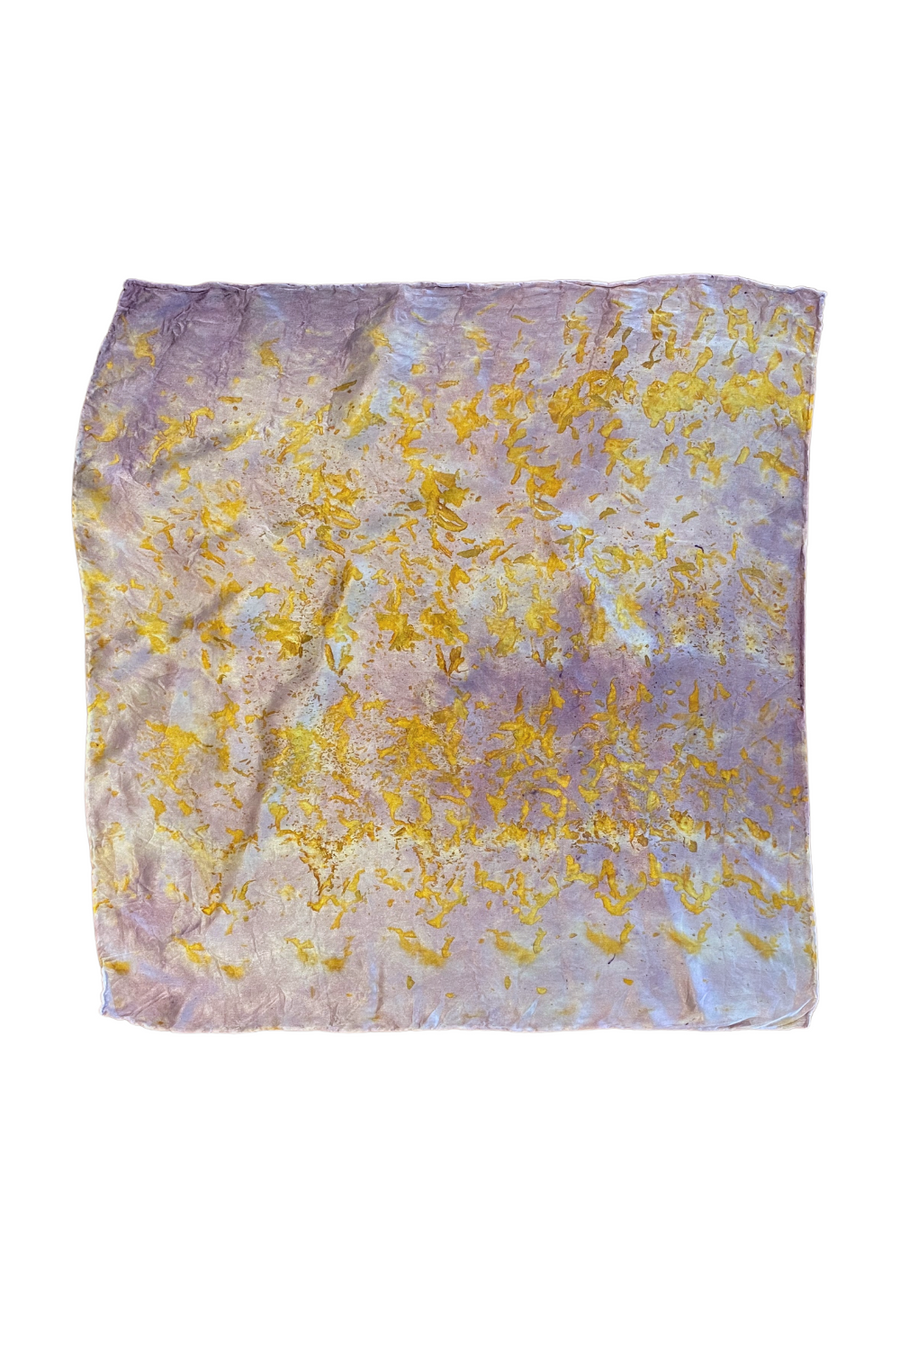 Botanically Dyed Square Silk Scarf in Lavender Foliage